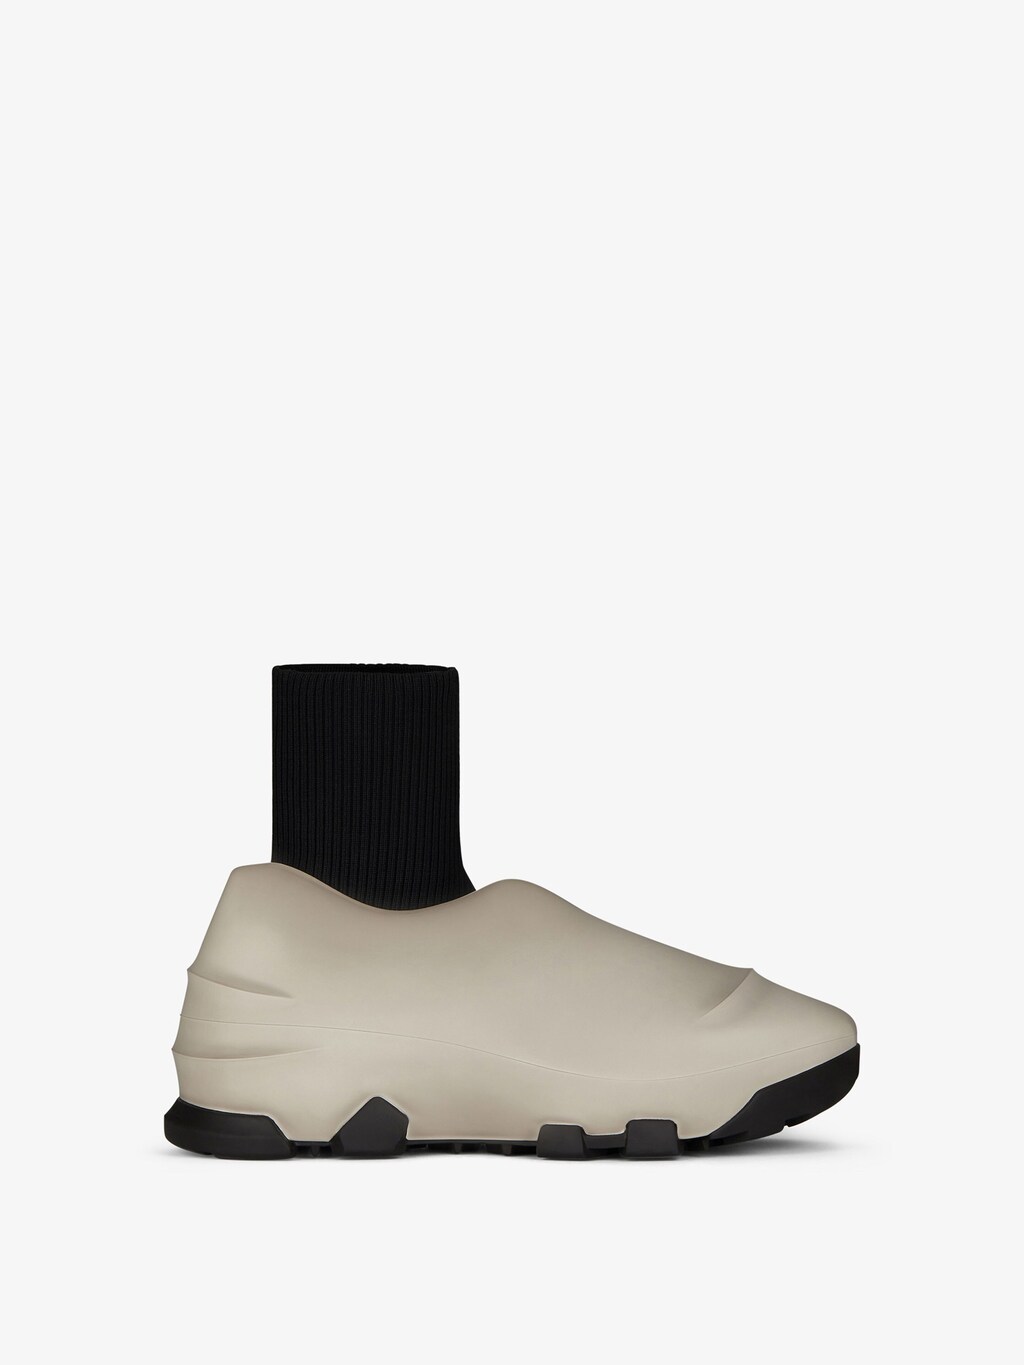 givenchy.com | Monumental mallow hybrid shoes in rubber and mesh